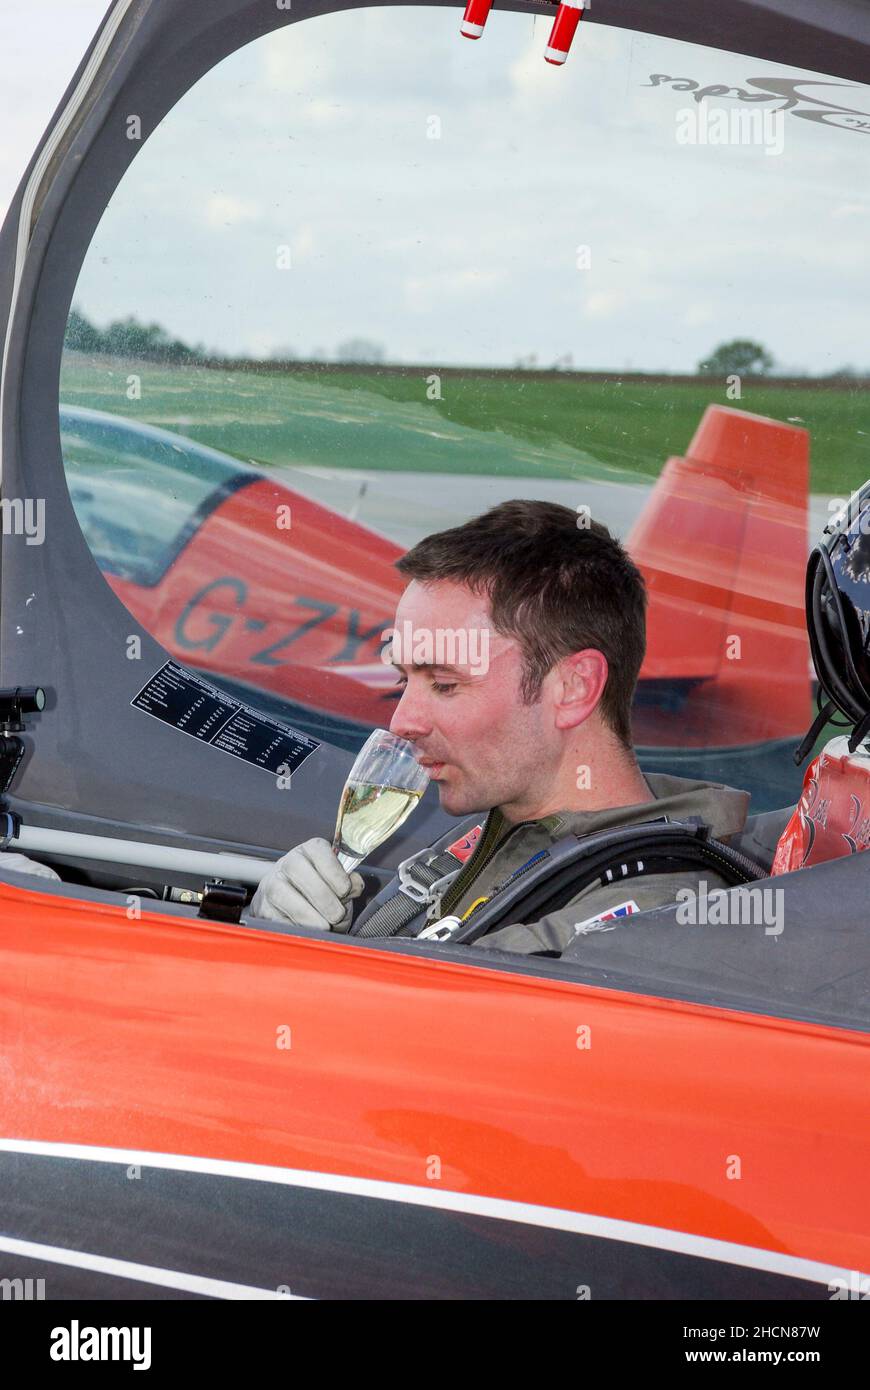 Jason Phelan completing an aerobatic challenge for the fly2help charity, having been flown by numerous aerobatic teams and pilots. Fundraiser Stock Photo